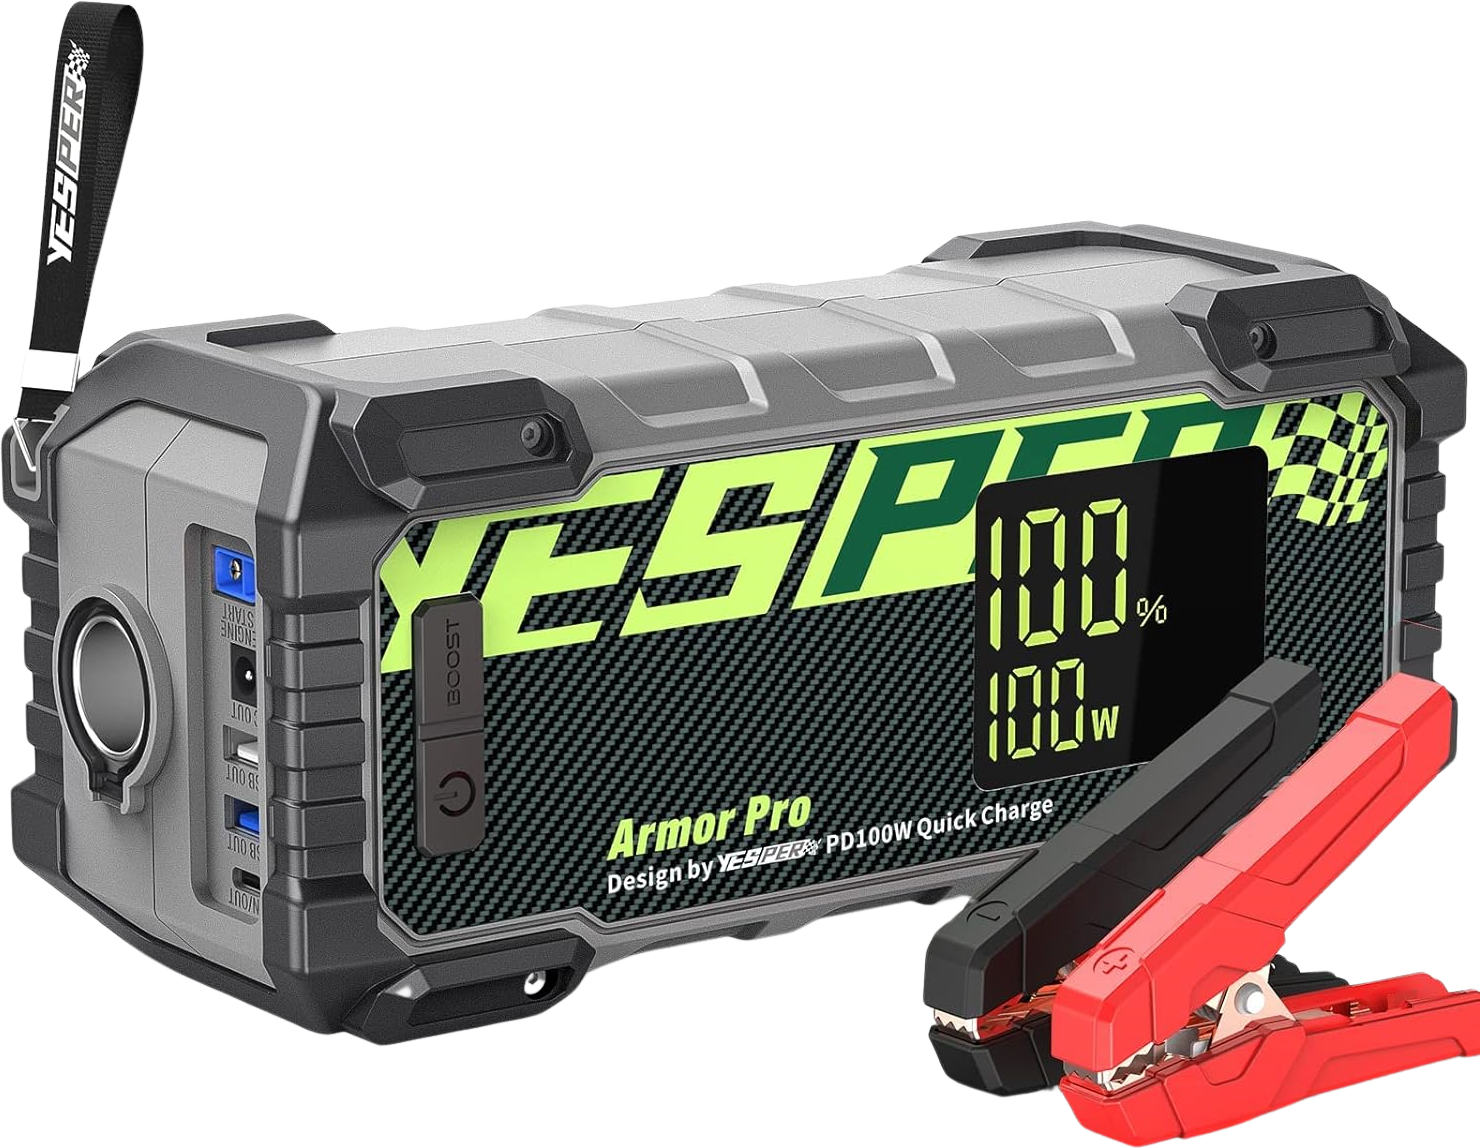 Yesper ARMOR-PRO Jump Starter Battery Pack Power Bank 2500A 66666mAh 120 Starts for 12V Vehicles Up To 8.0L Gas and 5.5L Diesel Engines New